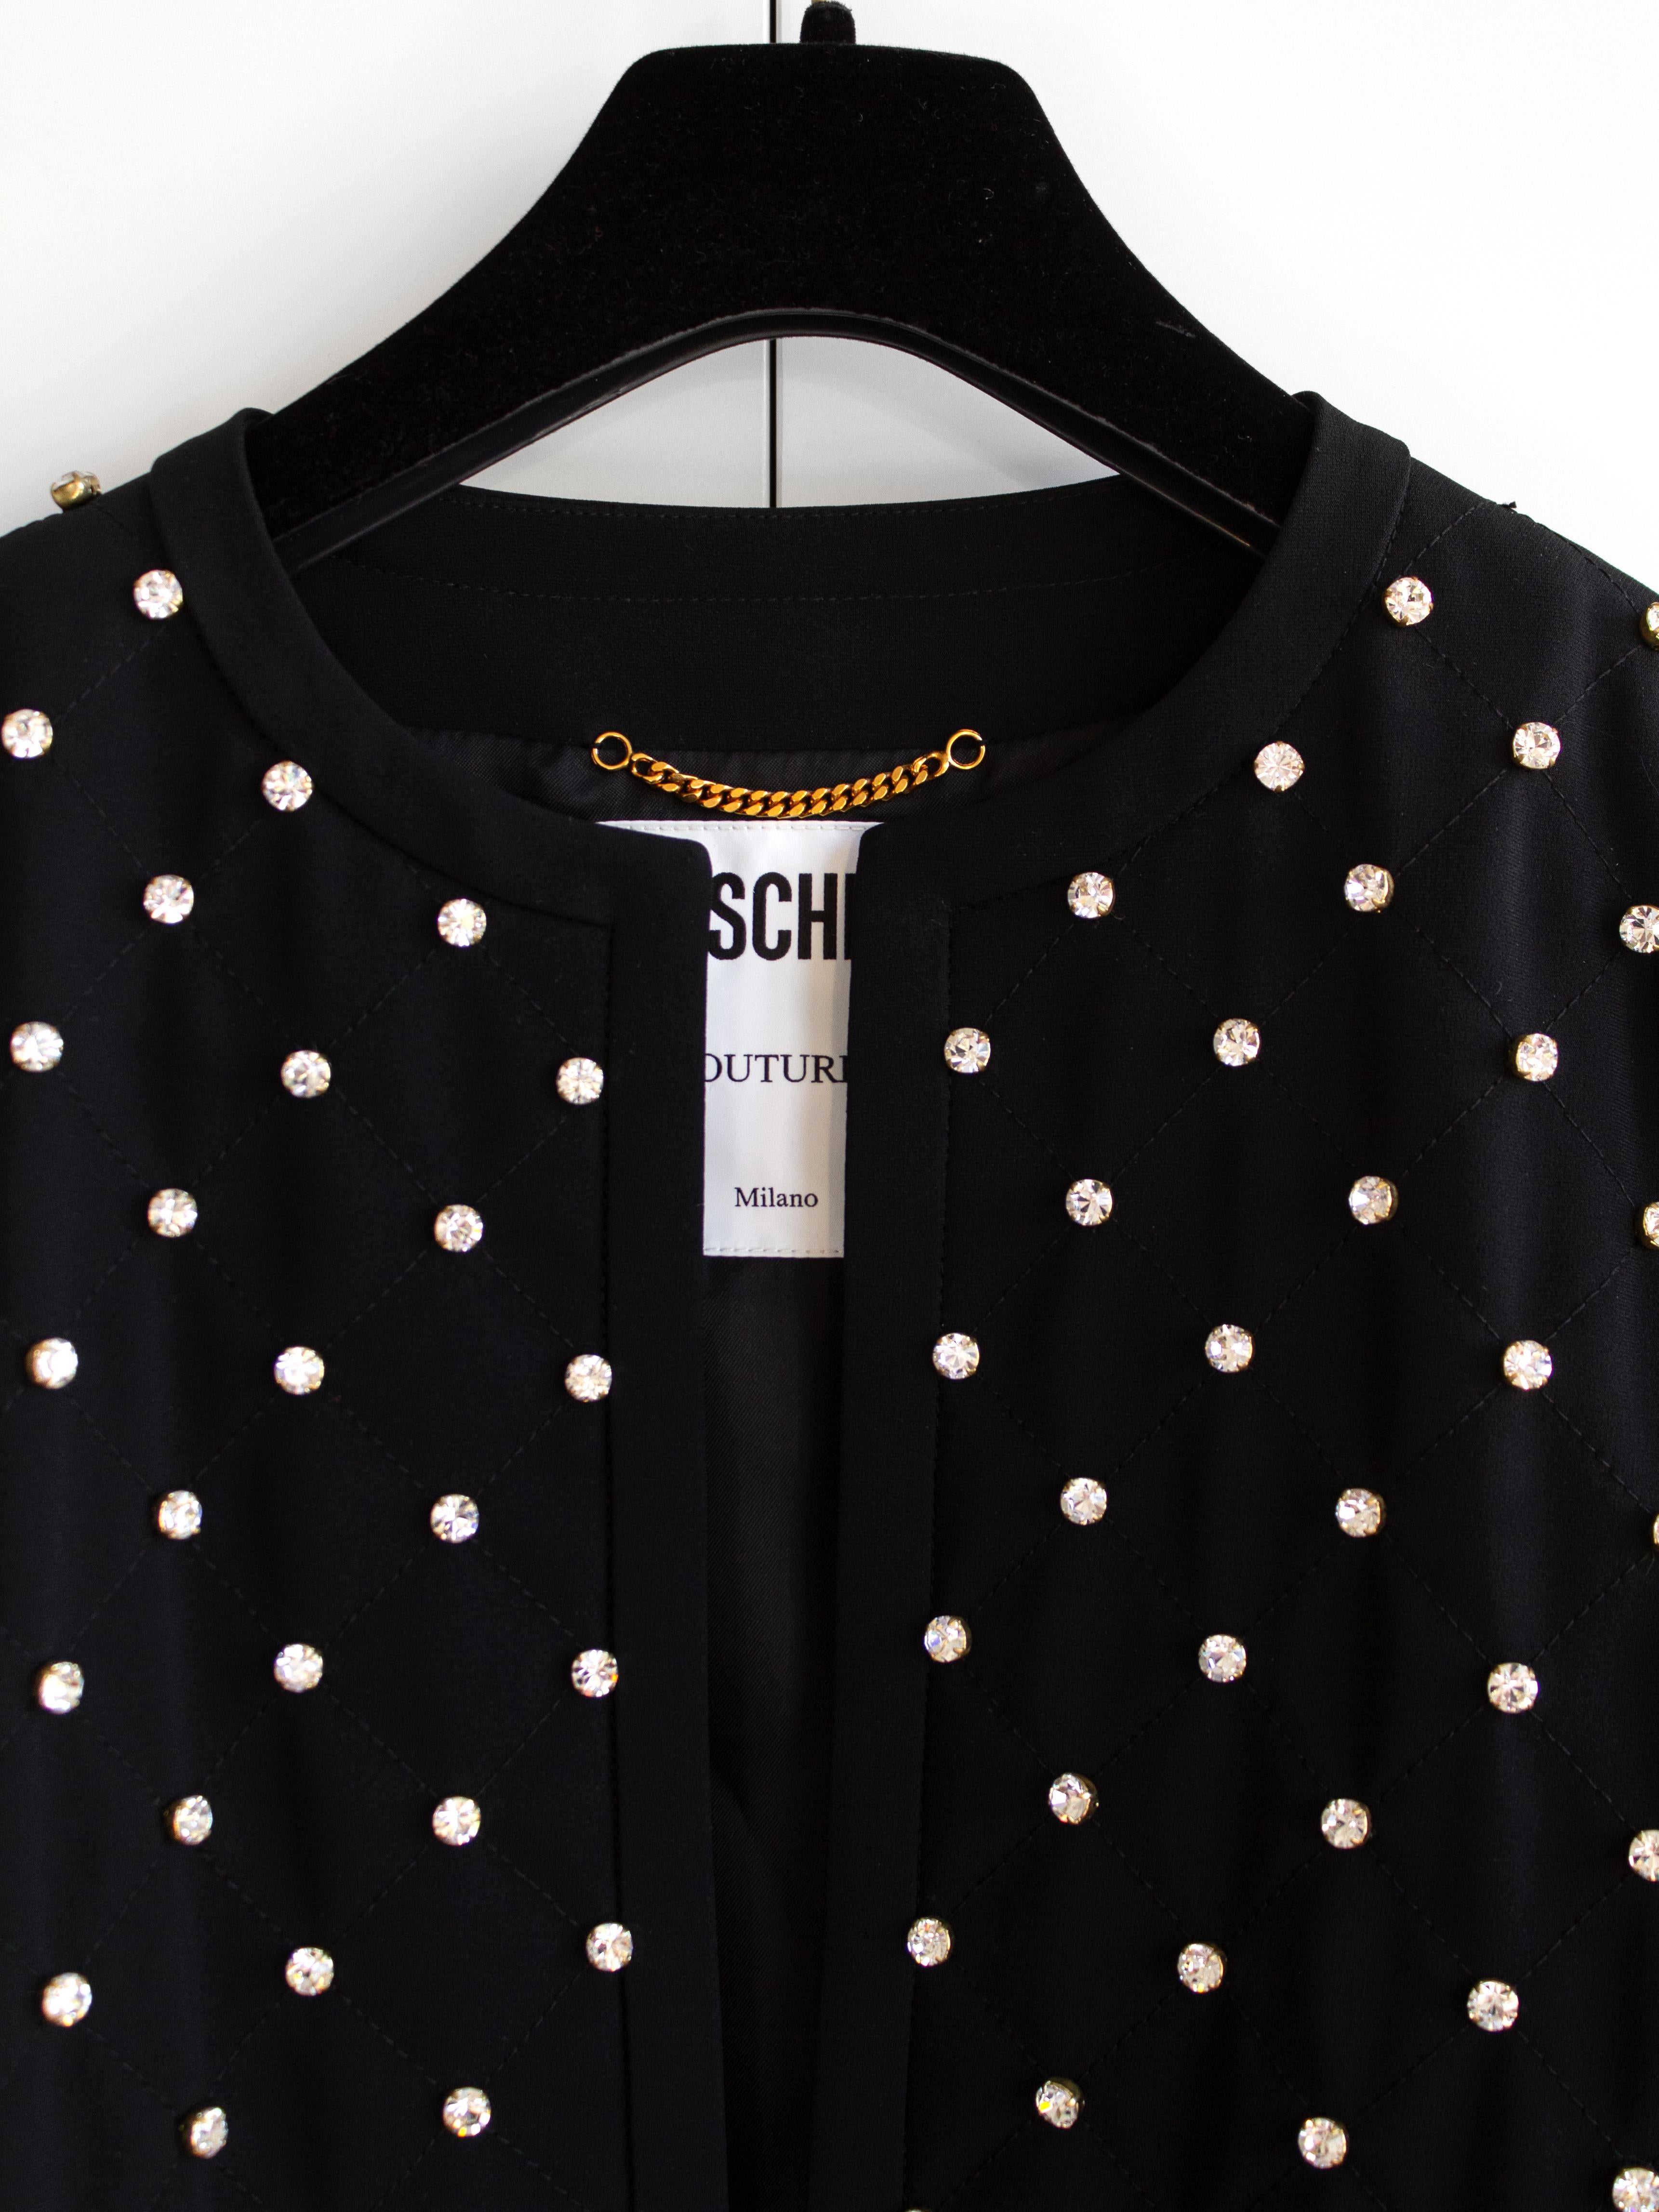 Moschino Couture S/S 2015 Barbie Crystal Embellished Rhinestone Black Jacket For Sale 1